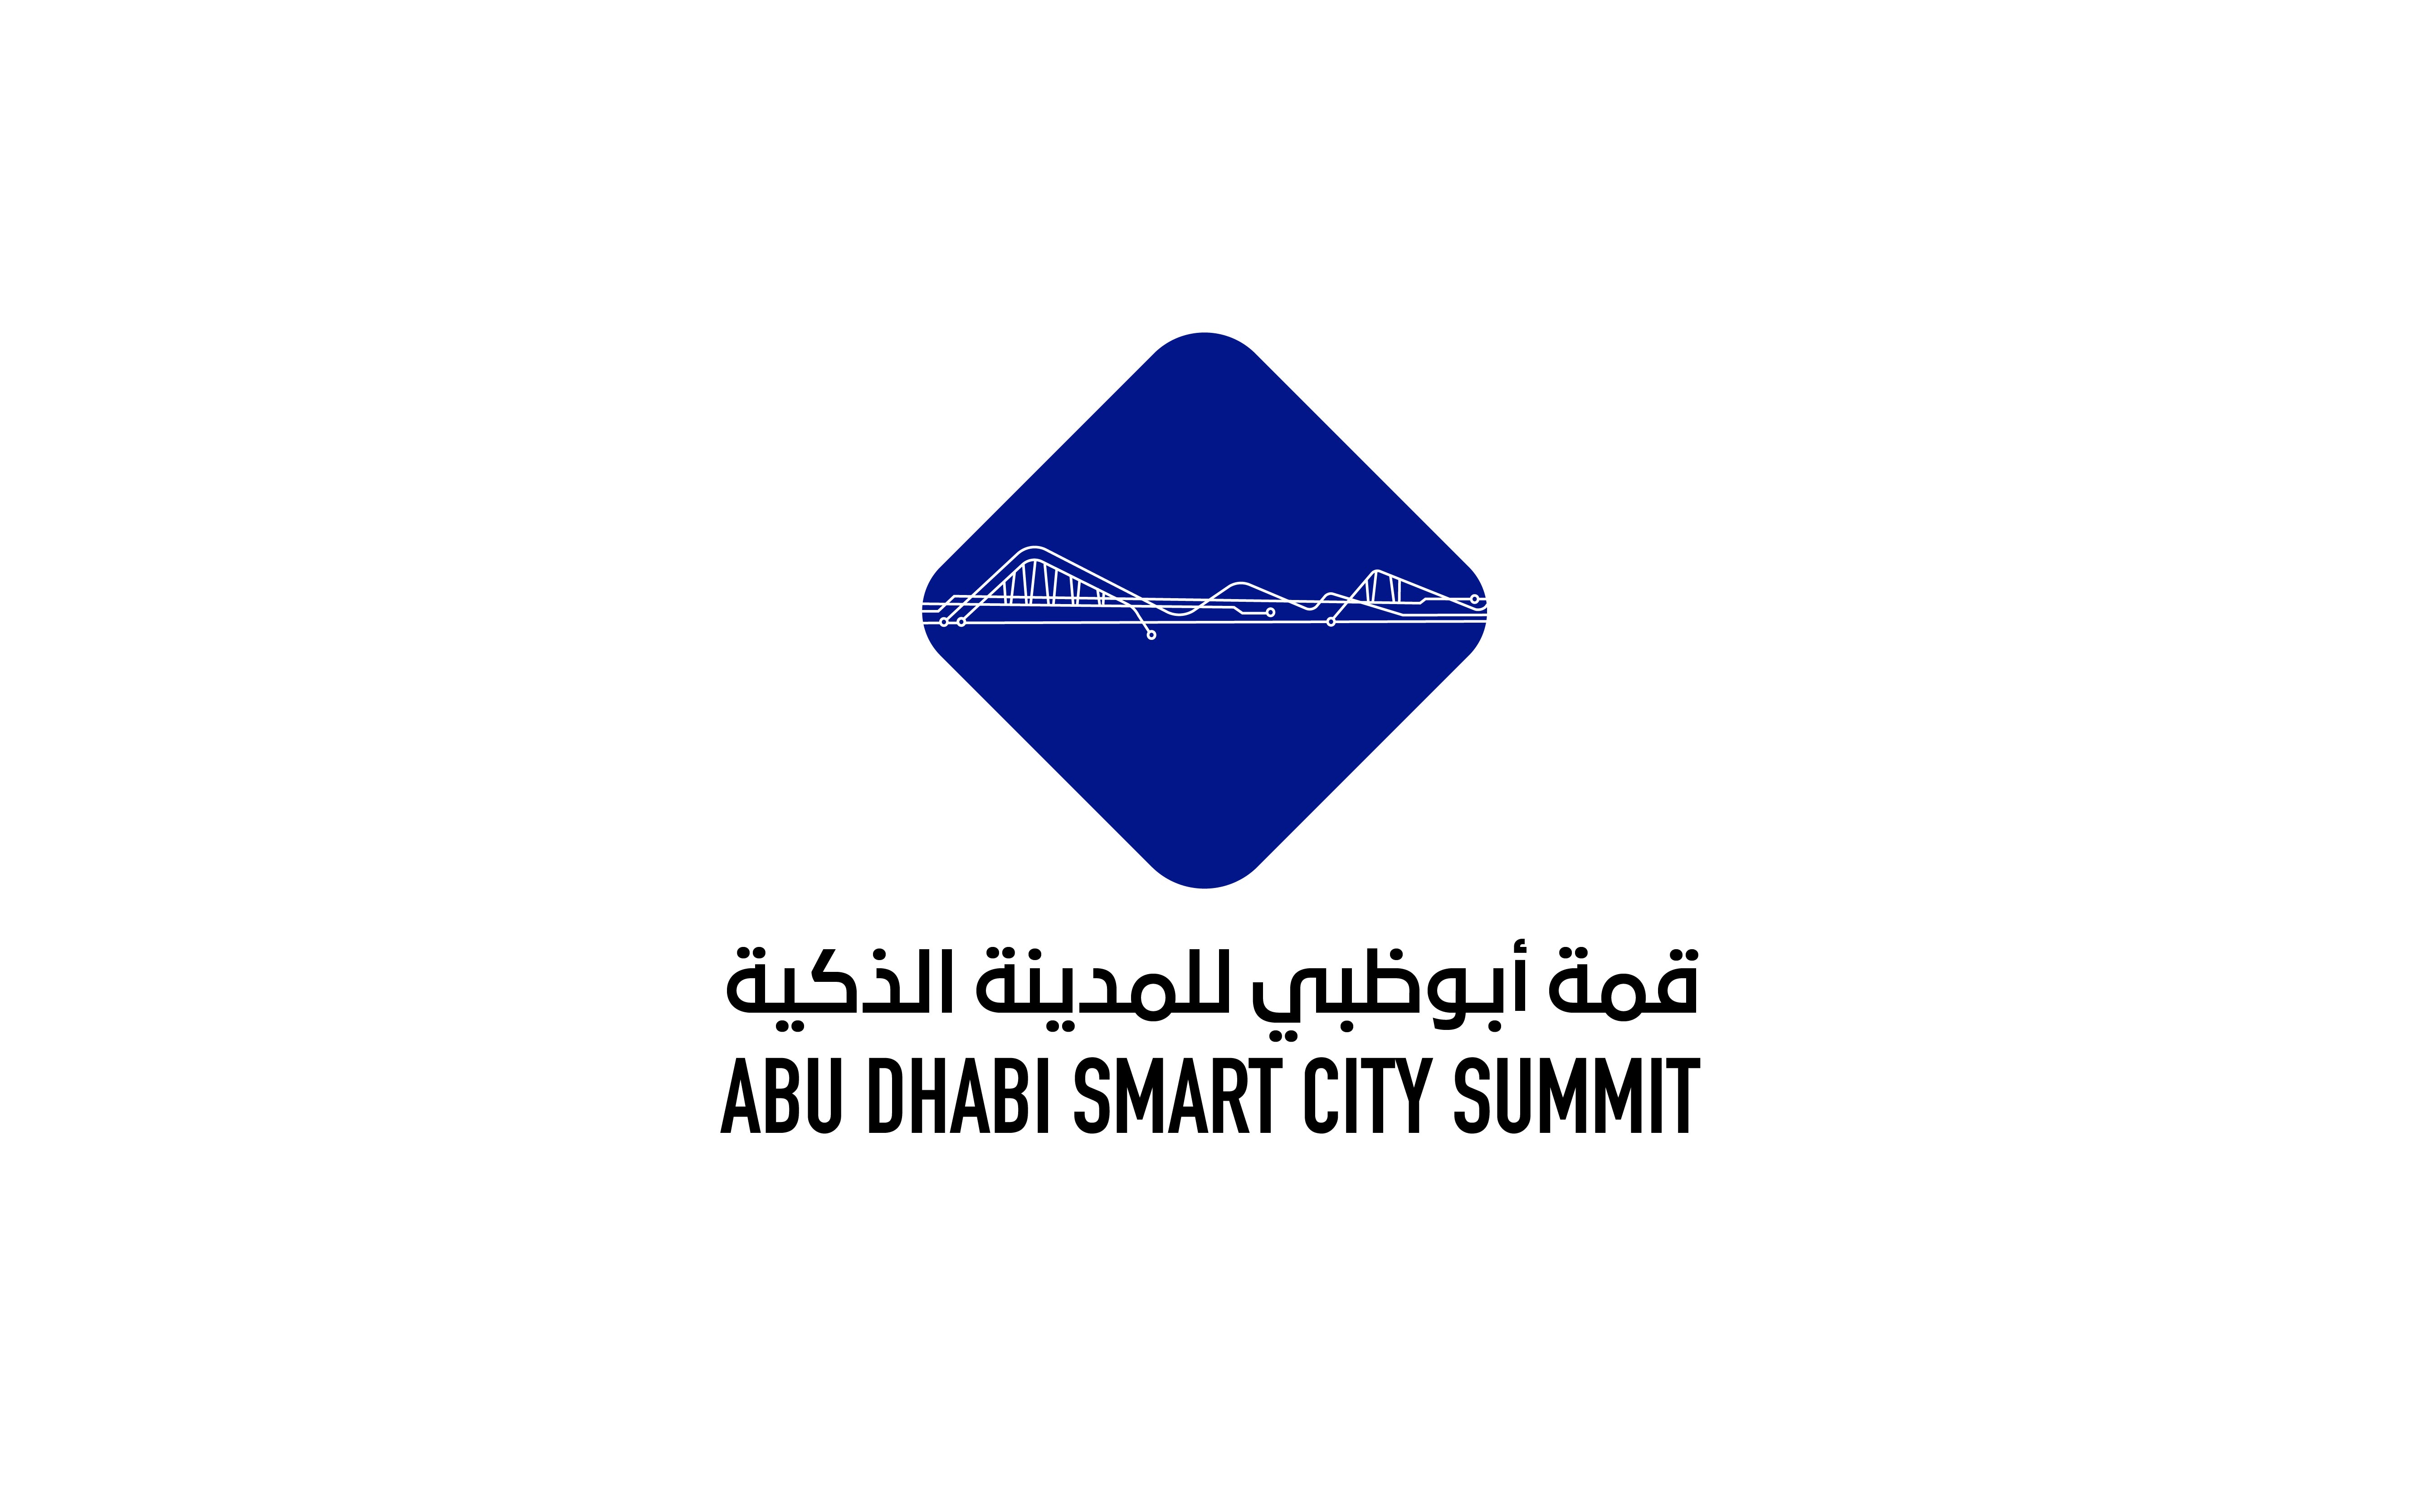 Abu Dhabi Smart City Summit Second Advisory Board Meeting Gathered More Than 40 High-Level Governmental And Non-Governmental Stakeholders